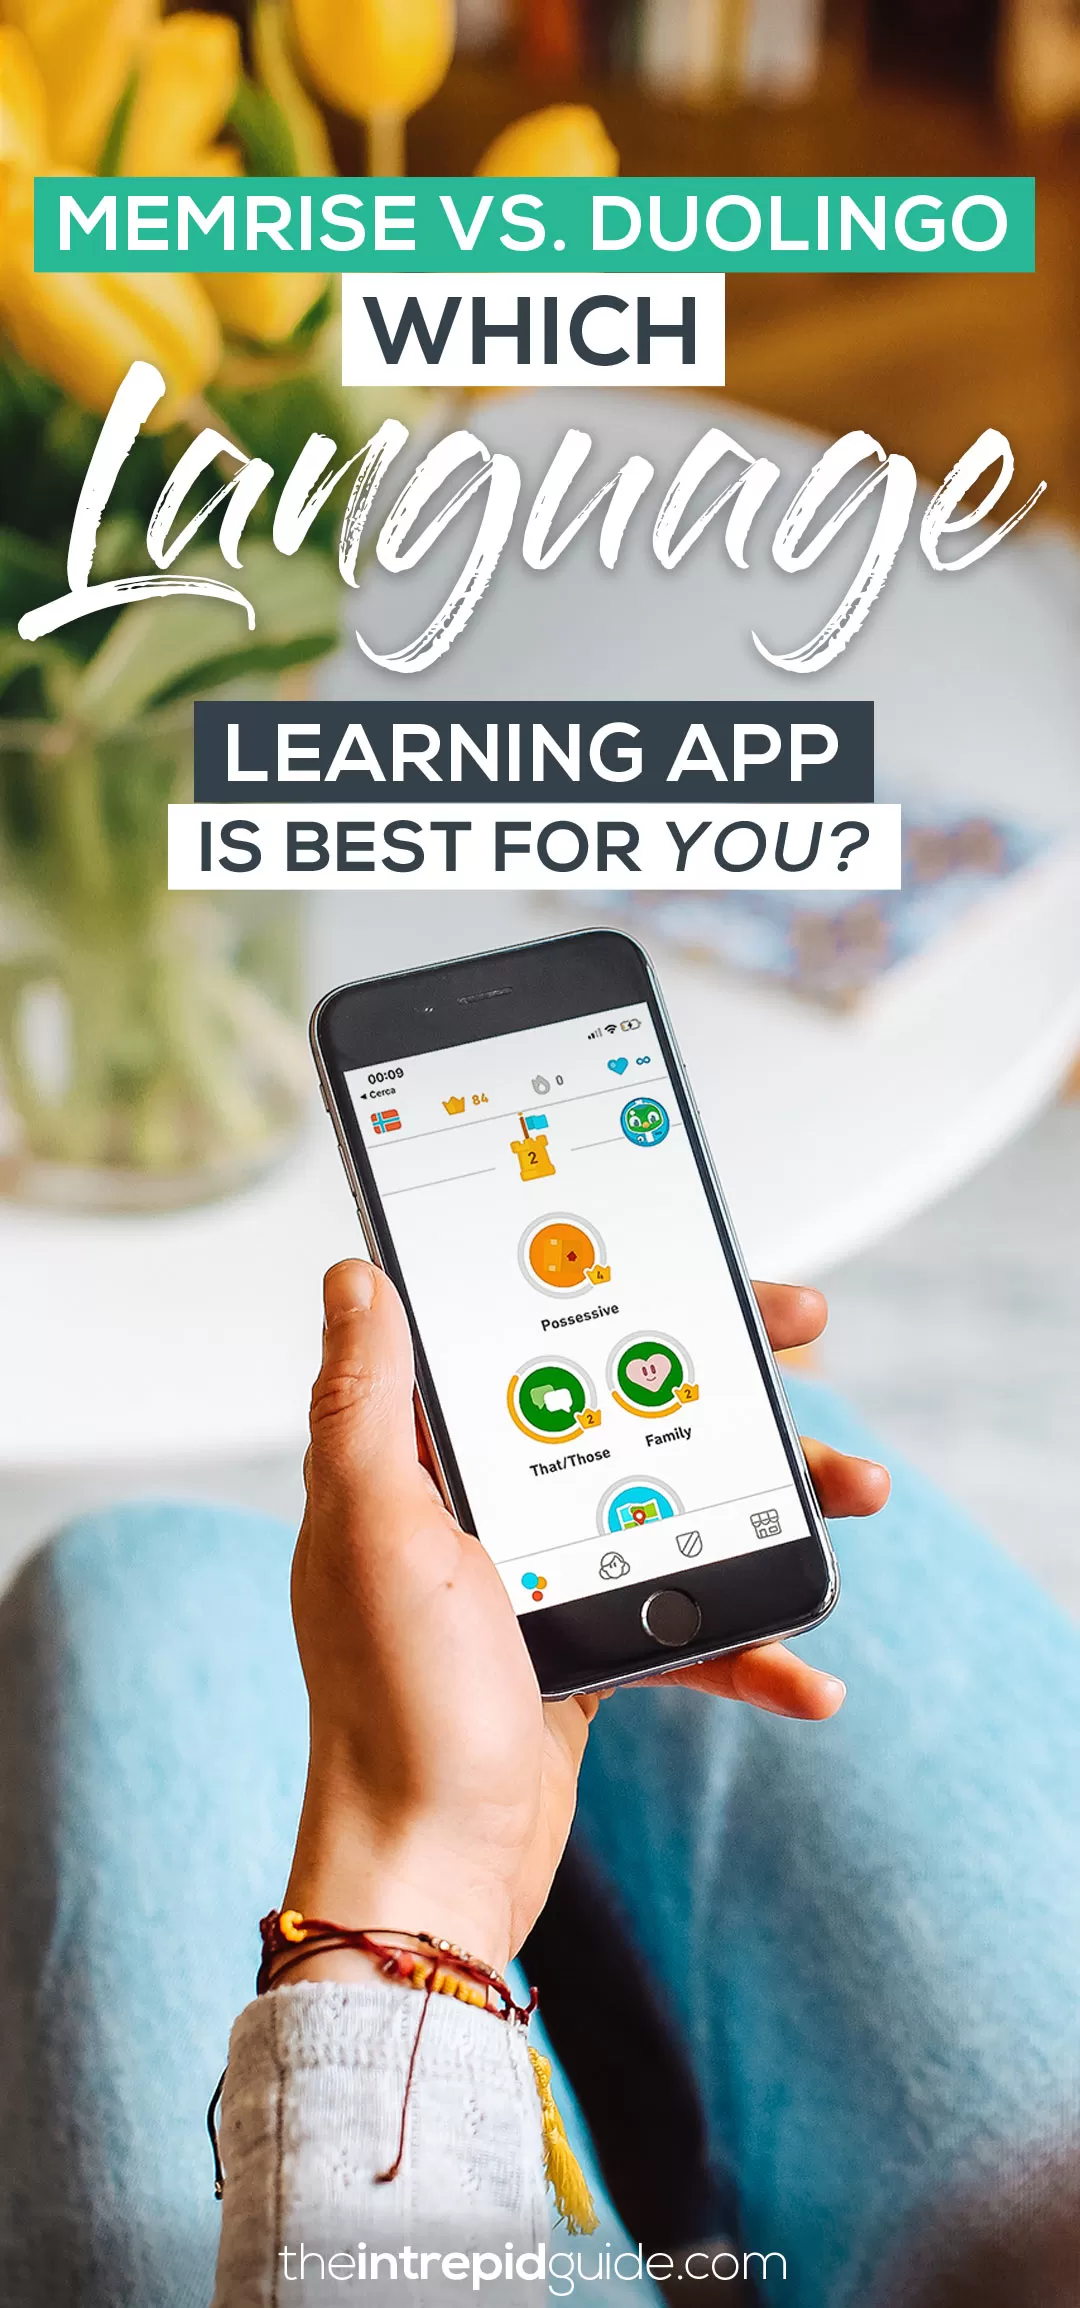 Memrise vs. Duolingo - Which language learning app is best for you?